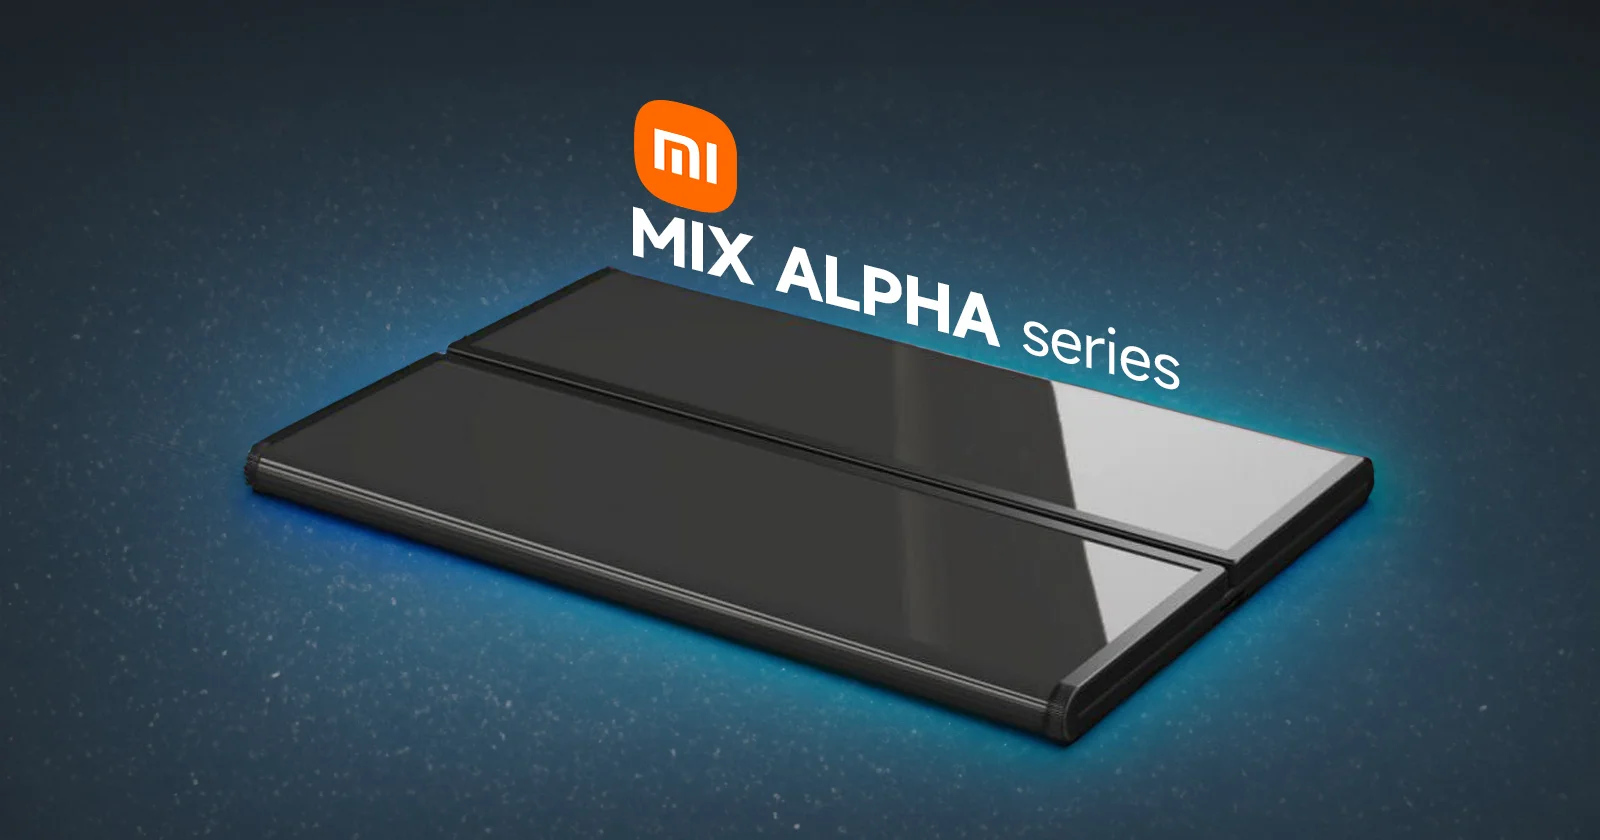 The 6 abandoned Xiaomi MIX smartphones and prototypes